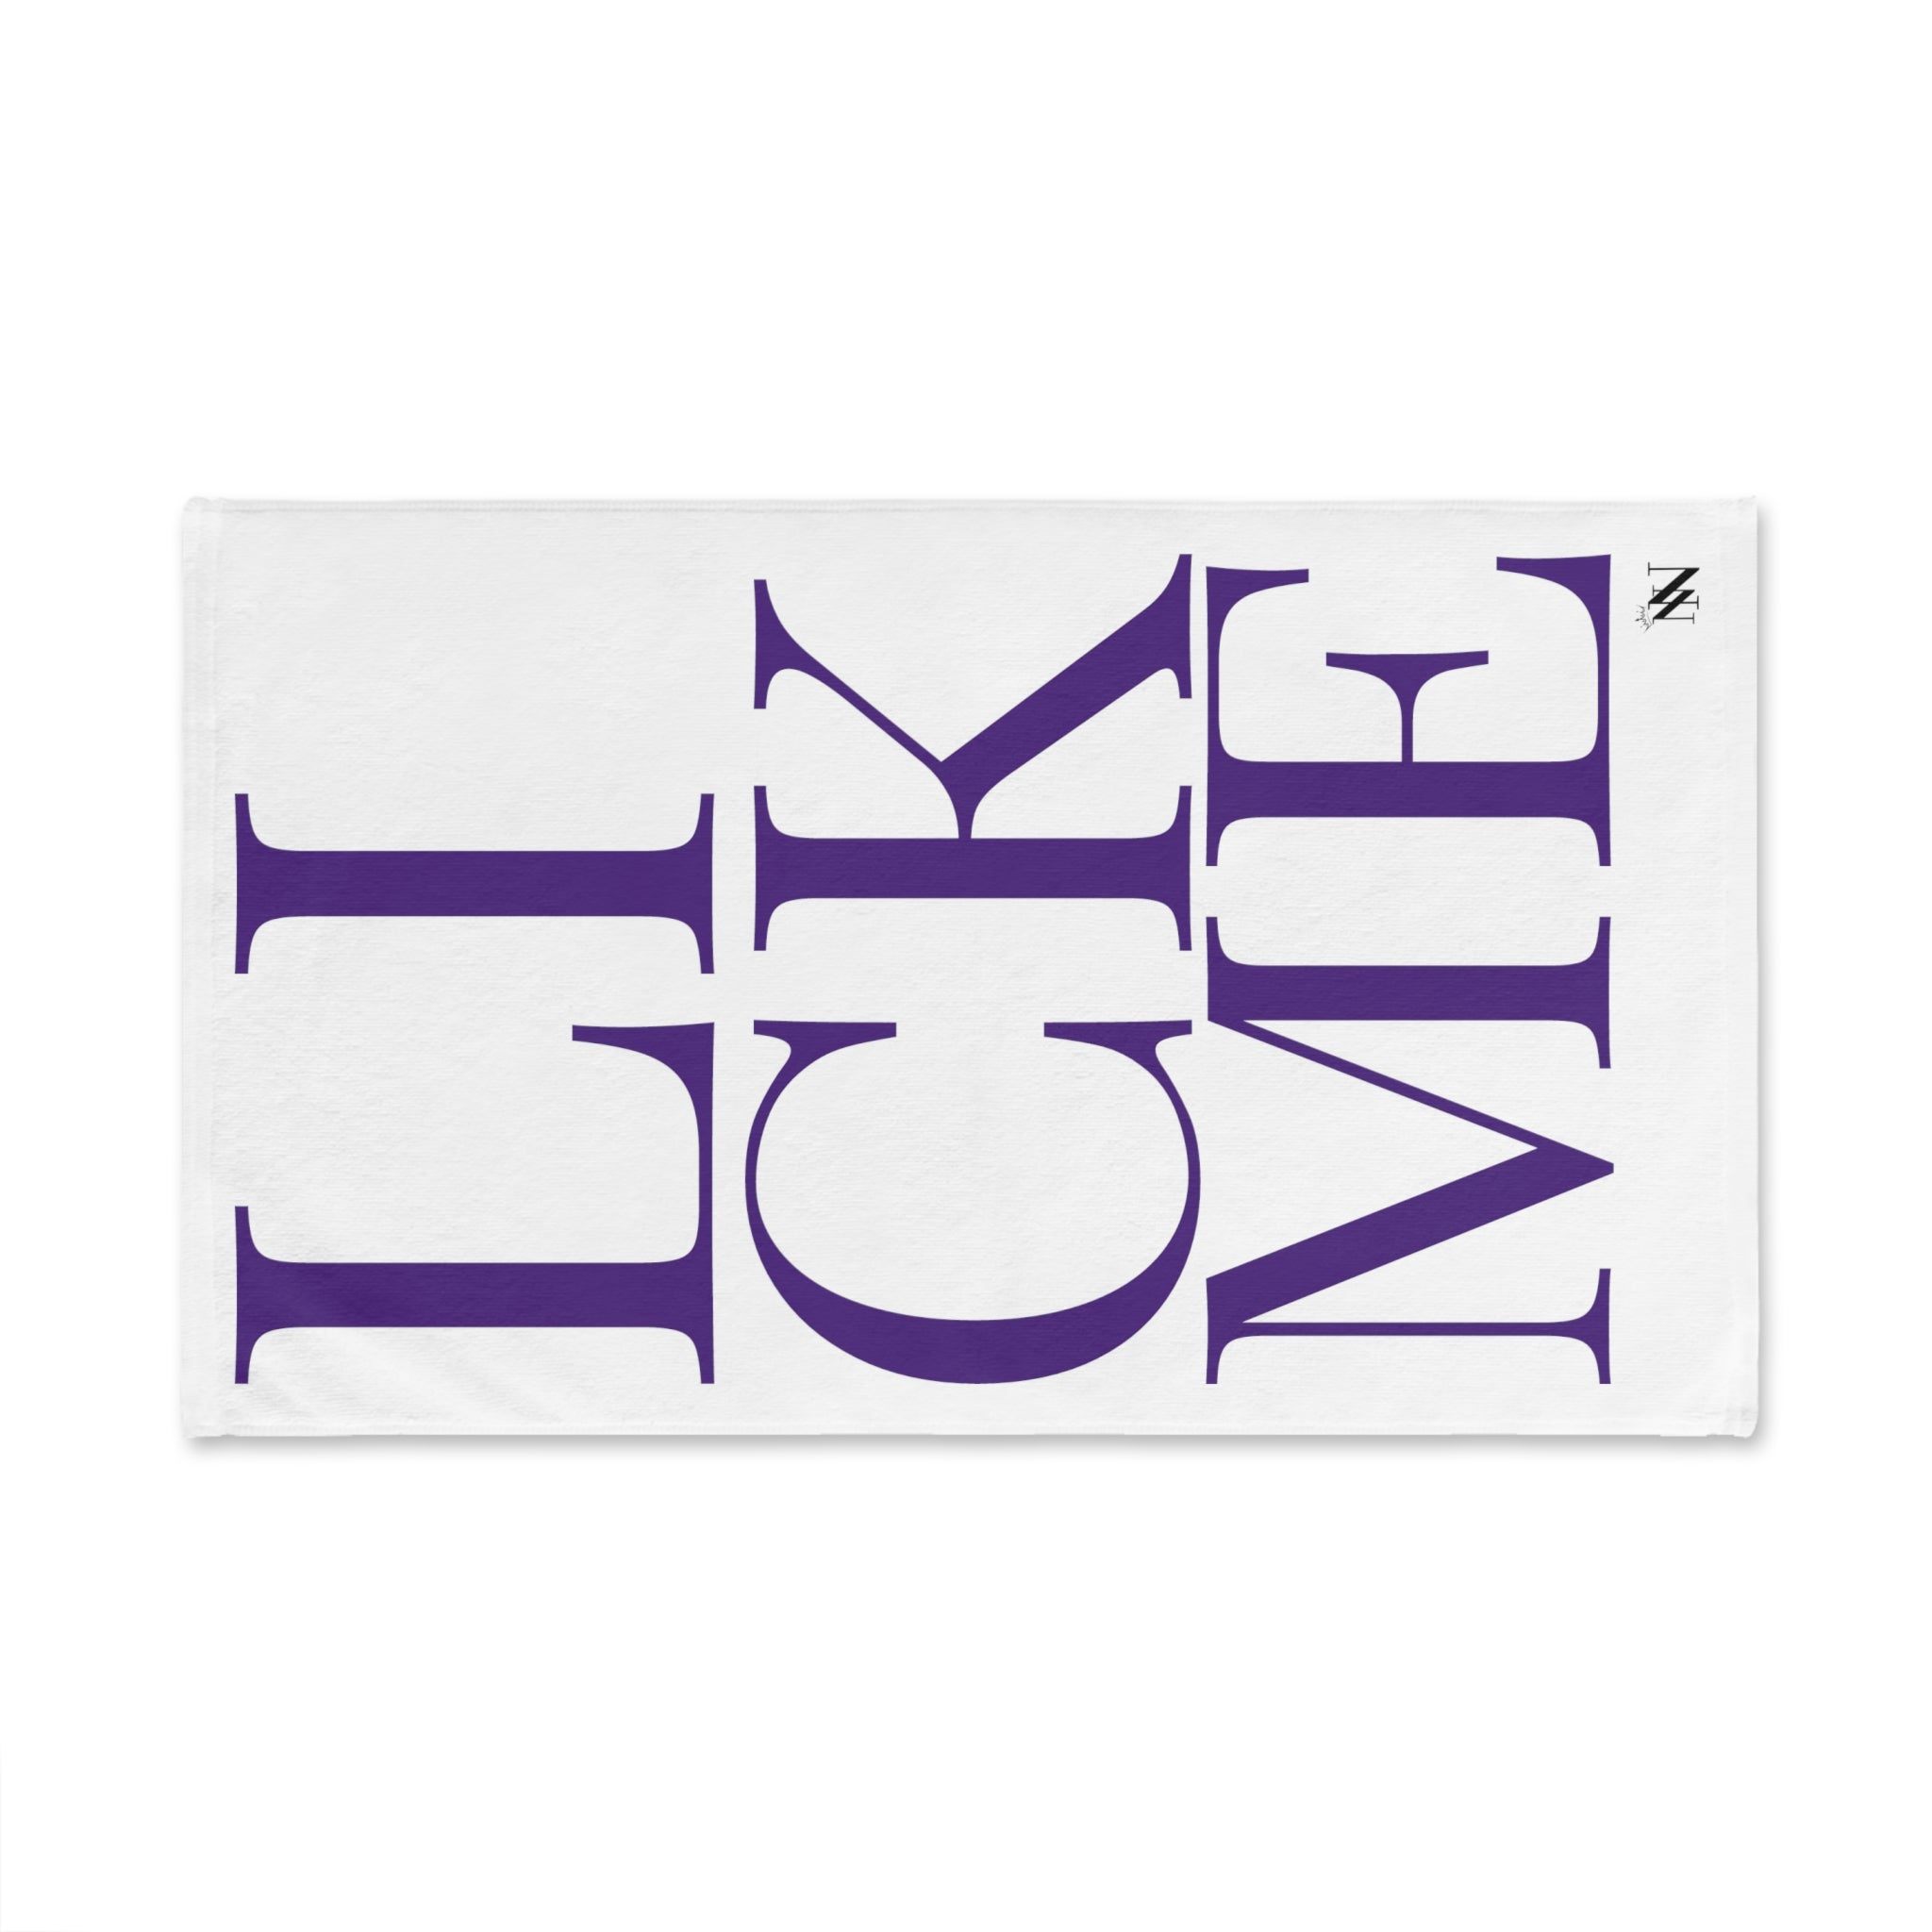 Lick Me PurpleWhite | Funny Gifts for Men - Gifts for Him - Birthday Gifts for Men, Him, Her, Husband, Boyfriend, Girlfriend, New Couple Gifts, Fathers & Valentines Day Gifts, Christmas Gifts NECTAR NAPKINS